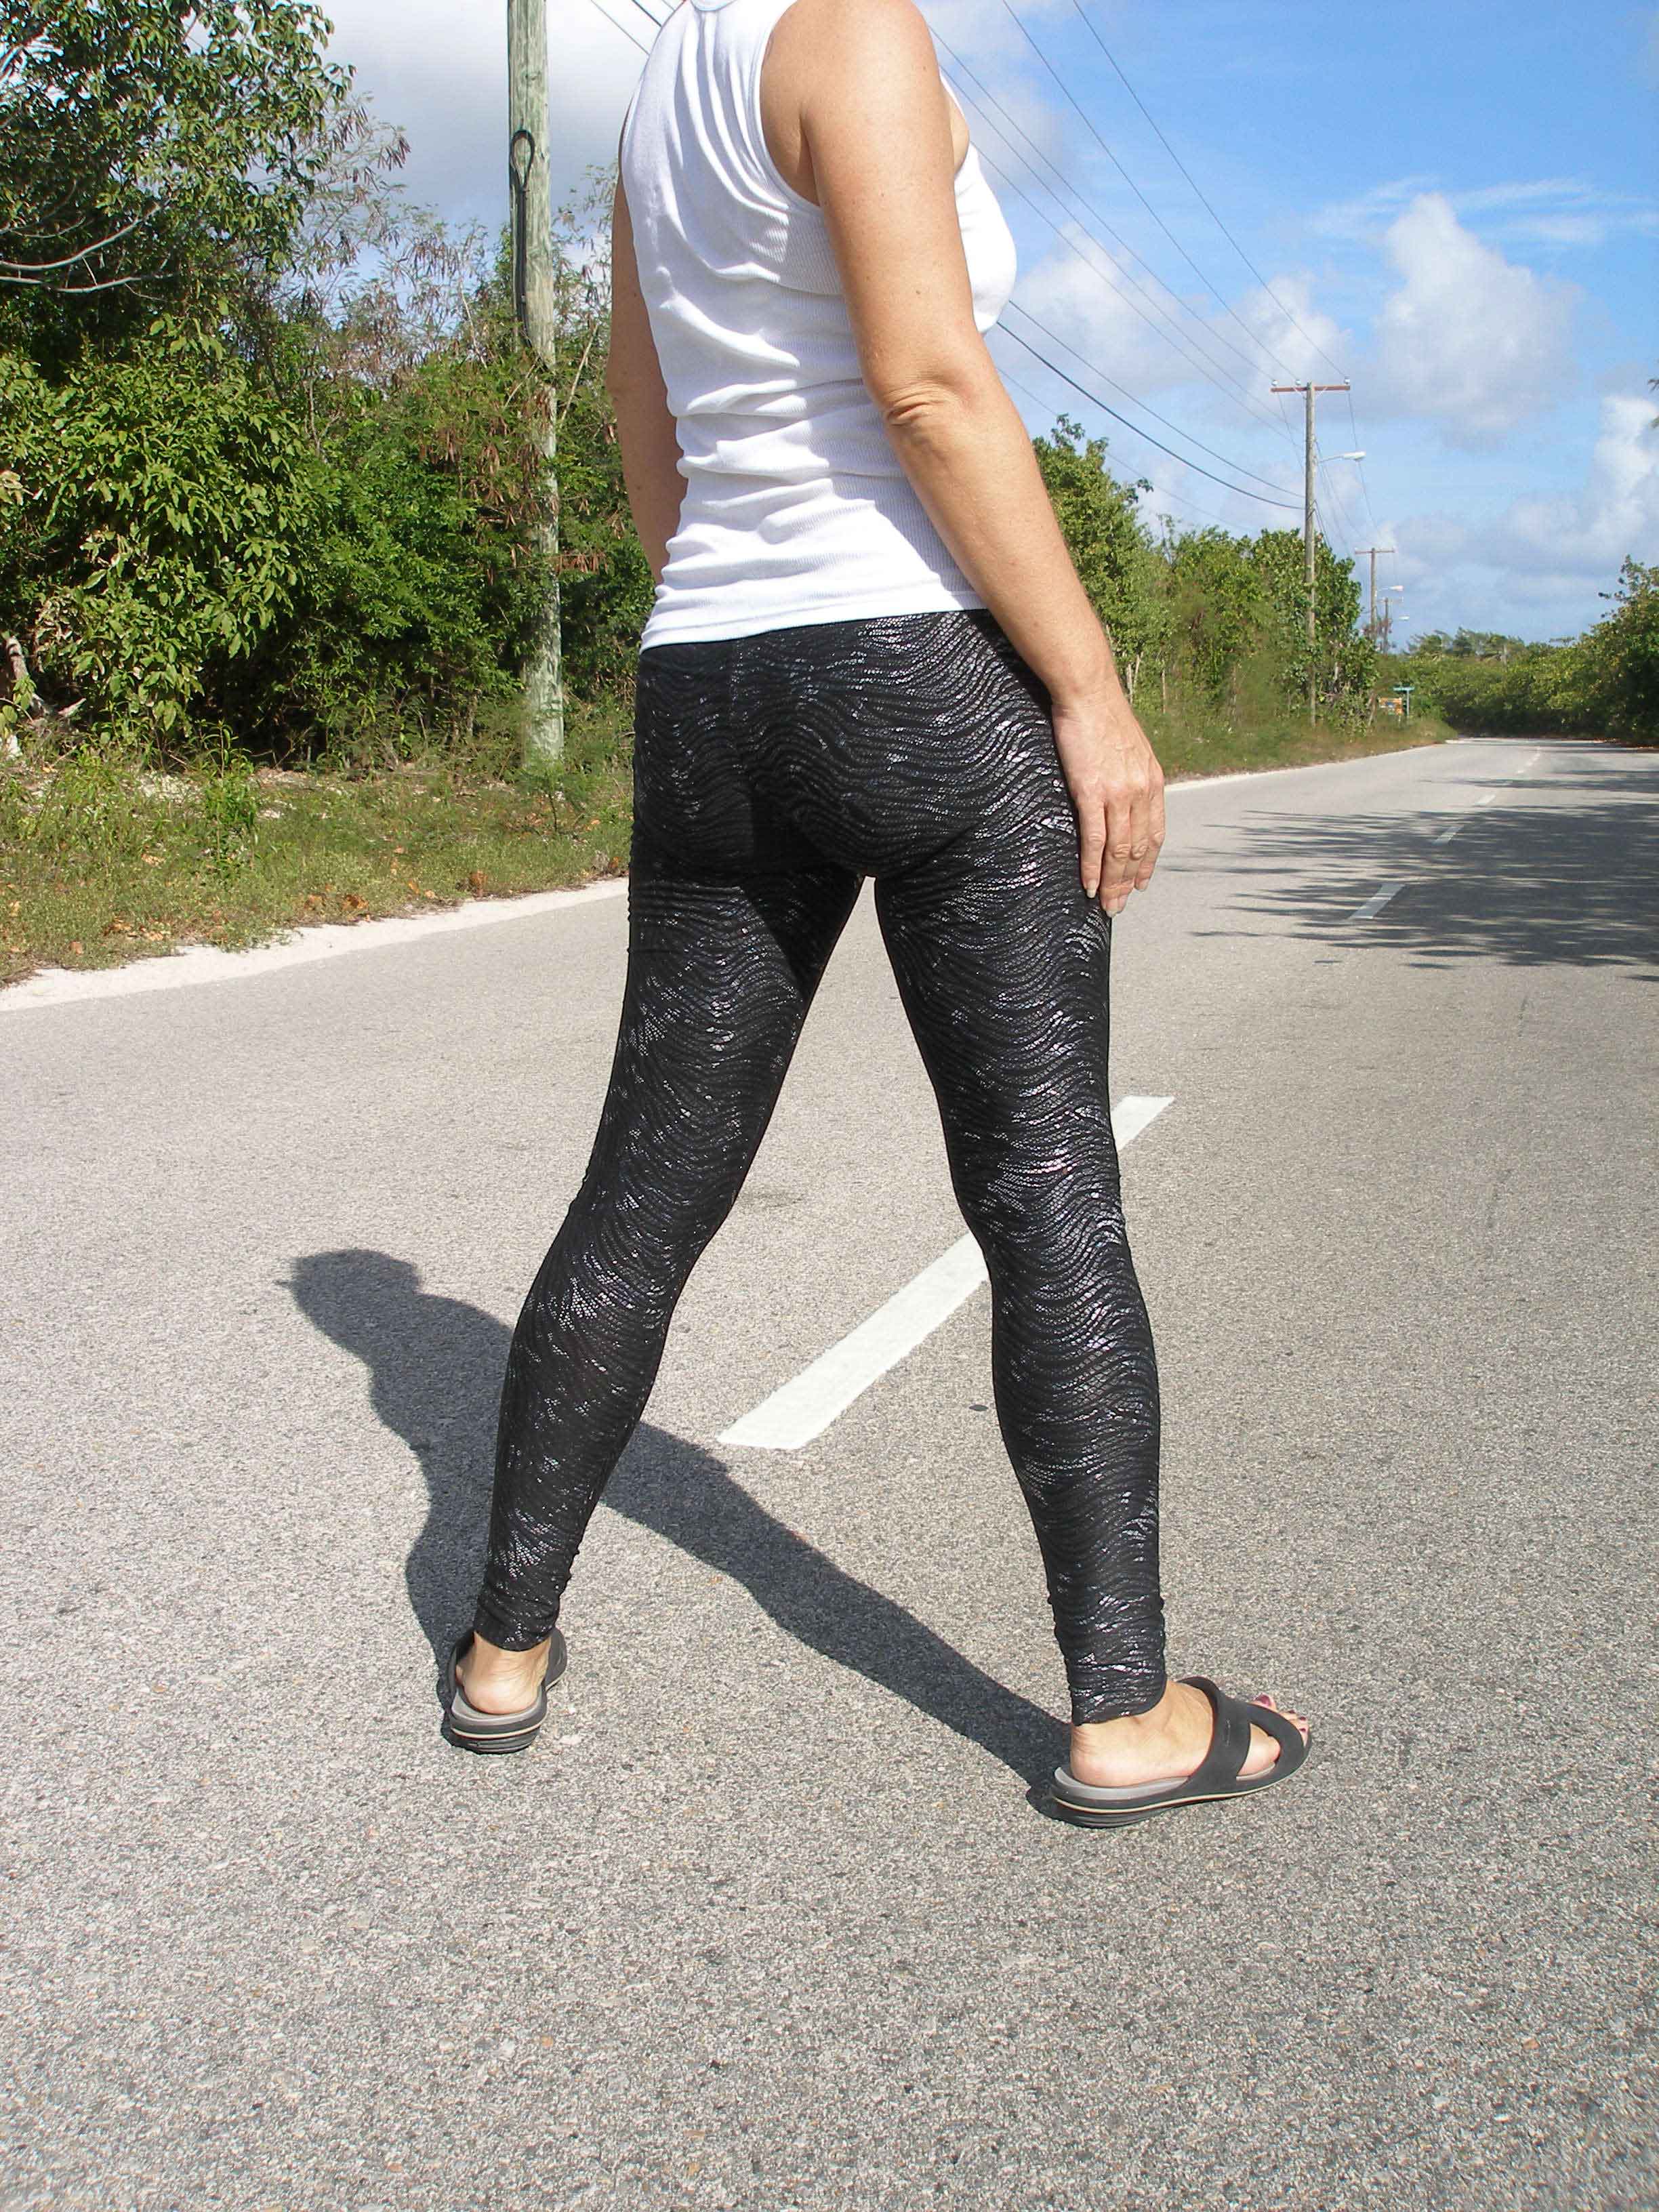 I drafted and made my own leggings